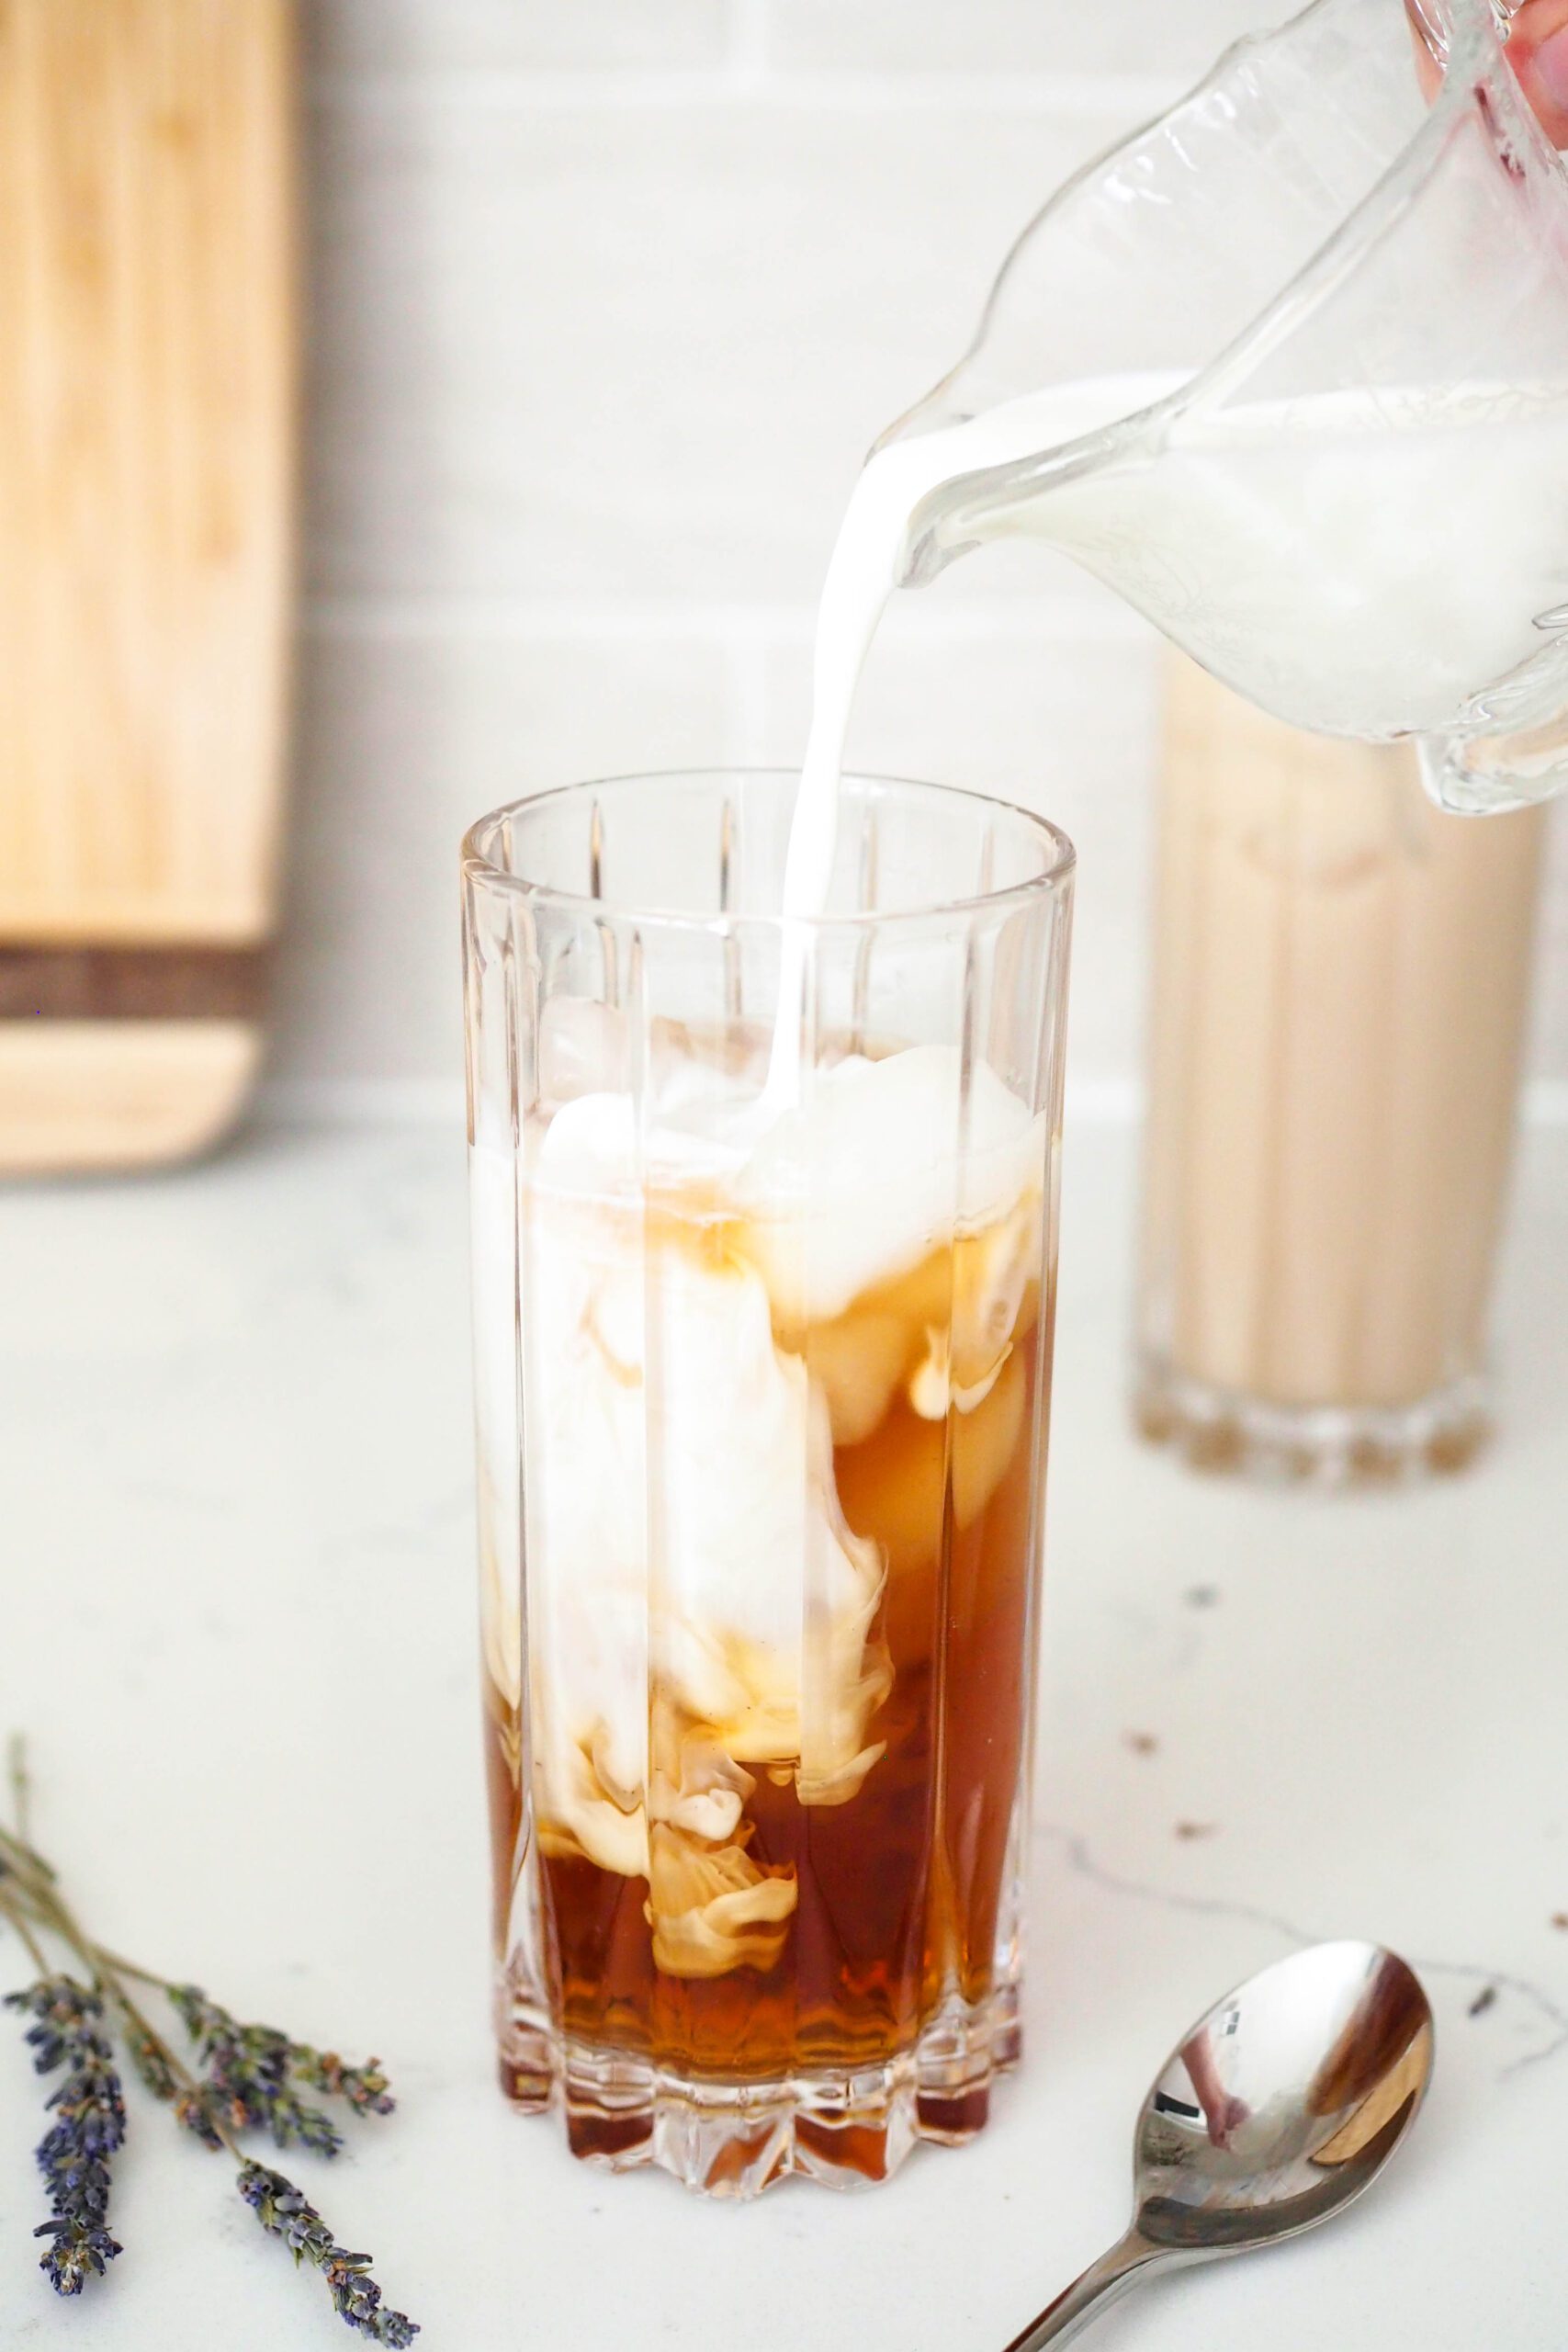 Milk is poured into iced tea.